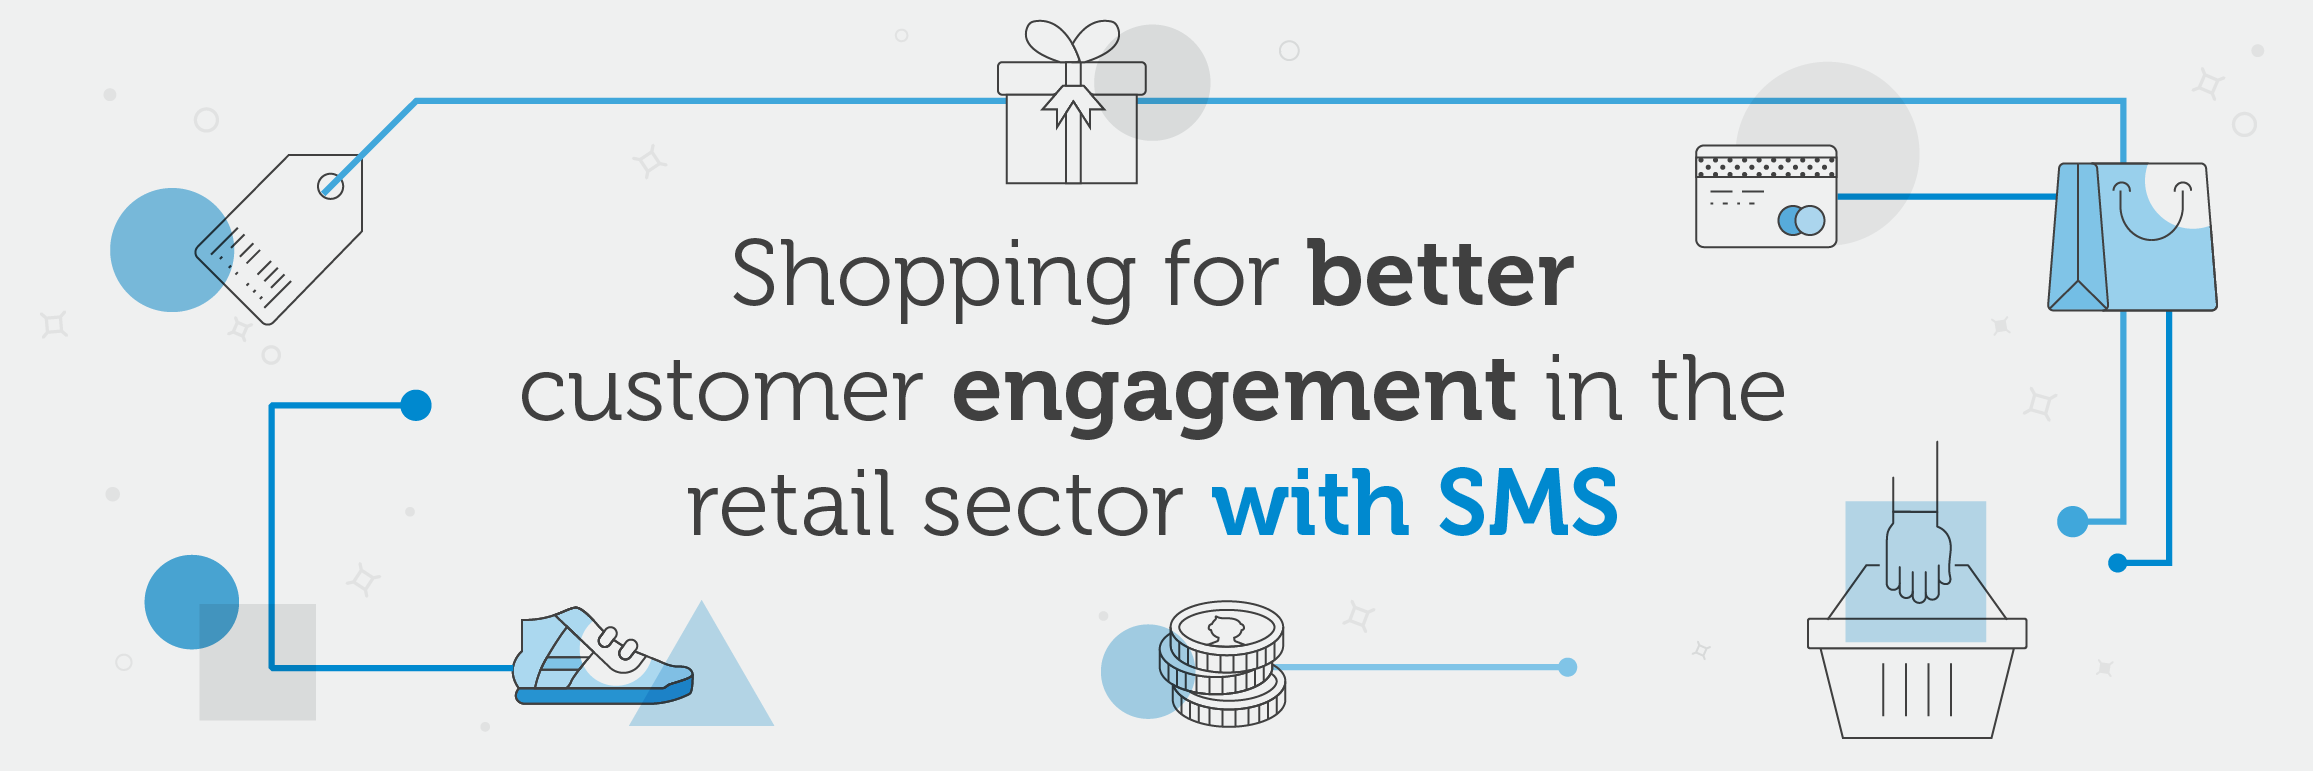 Shopping for better customer engagement in the retail sector with SMS